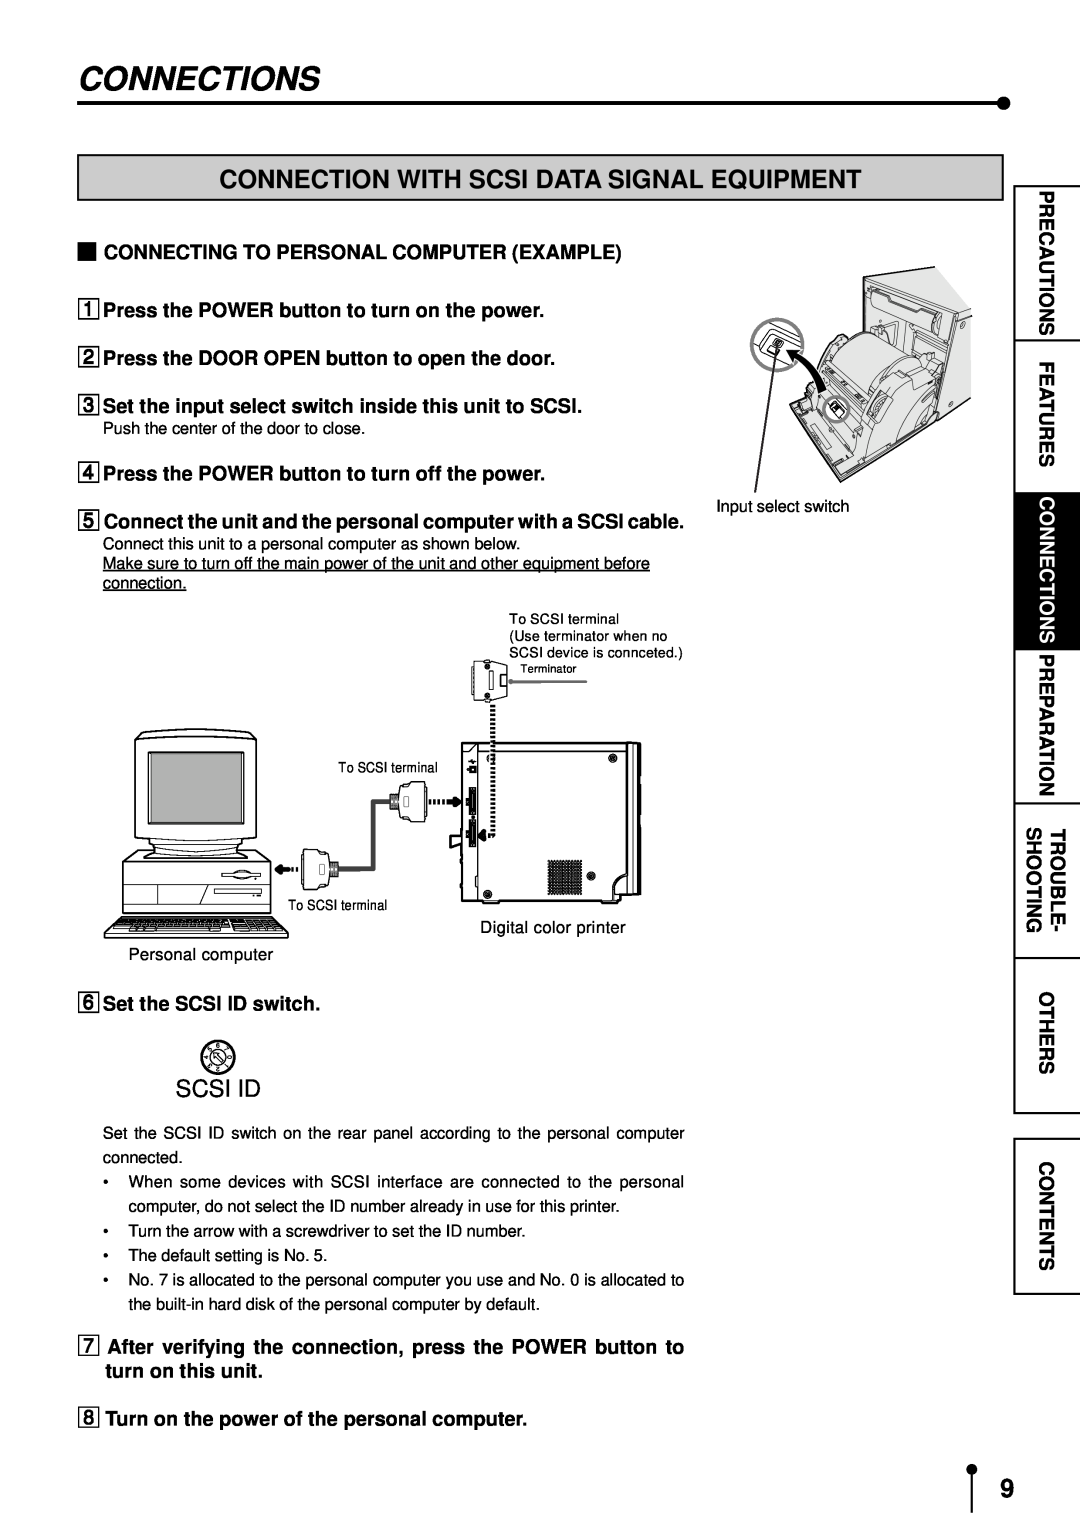 Mitsubishi Electronics CP9500DW Connections, Connection With Scsi Data Signal Equipment, Scsi Id, Set the SCSI ID switch 